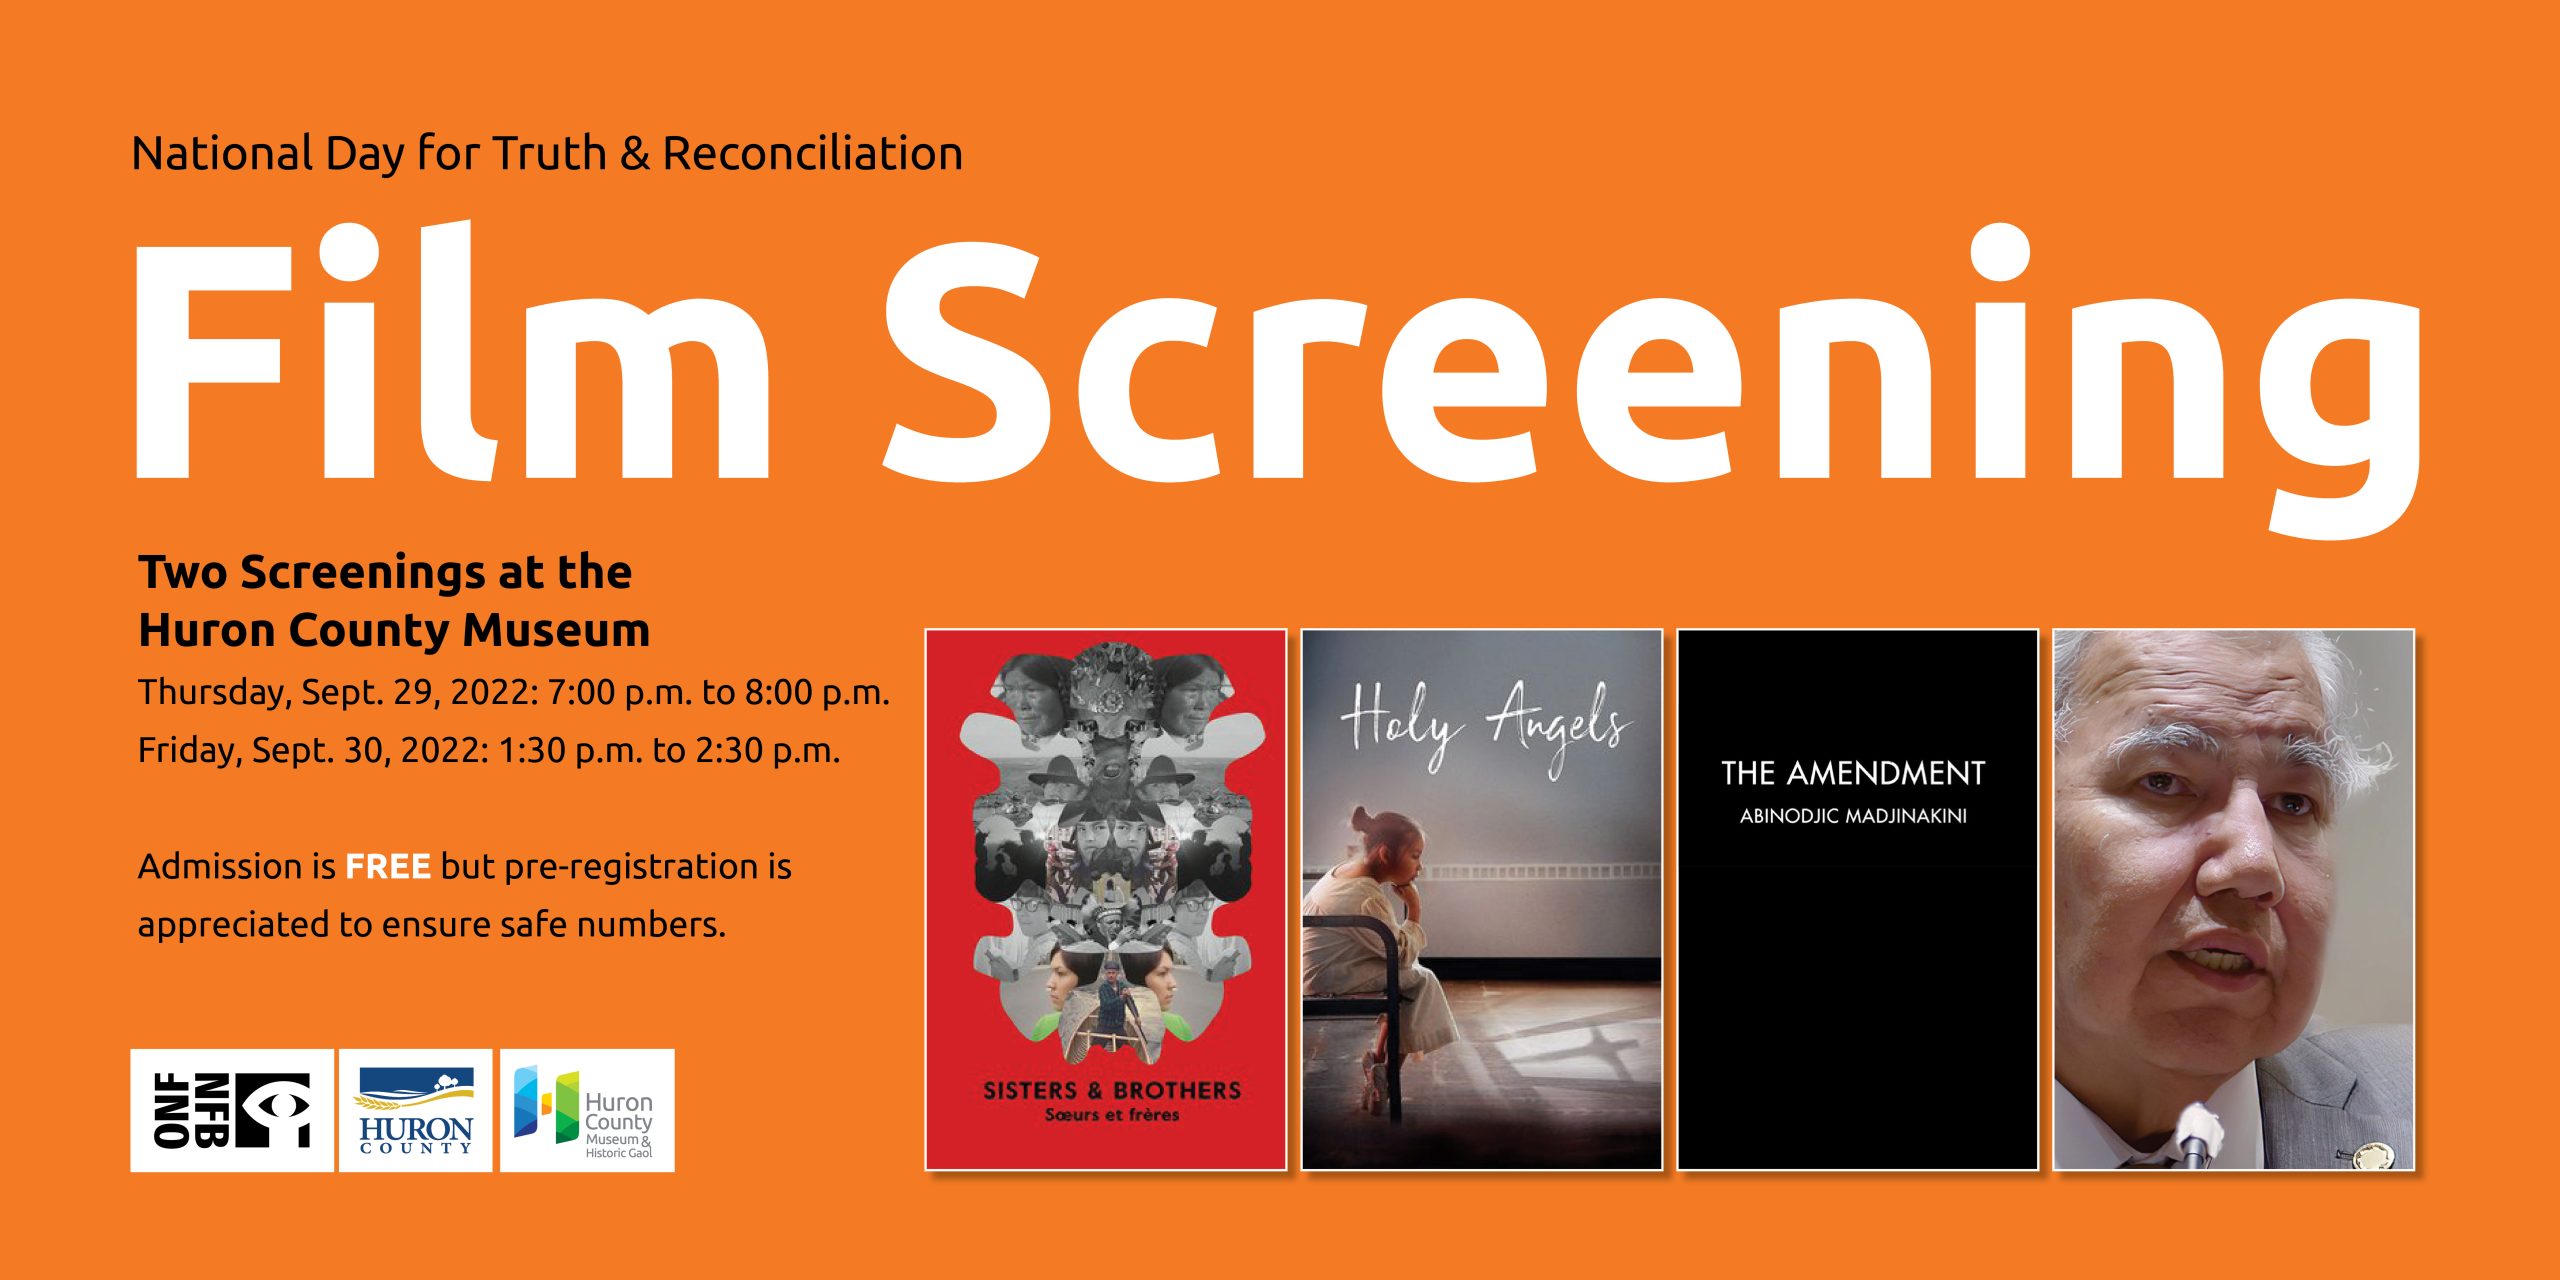 Text promoting National Day for Truth & Reconciliation film screenings with images of four films being screened